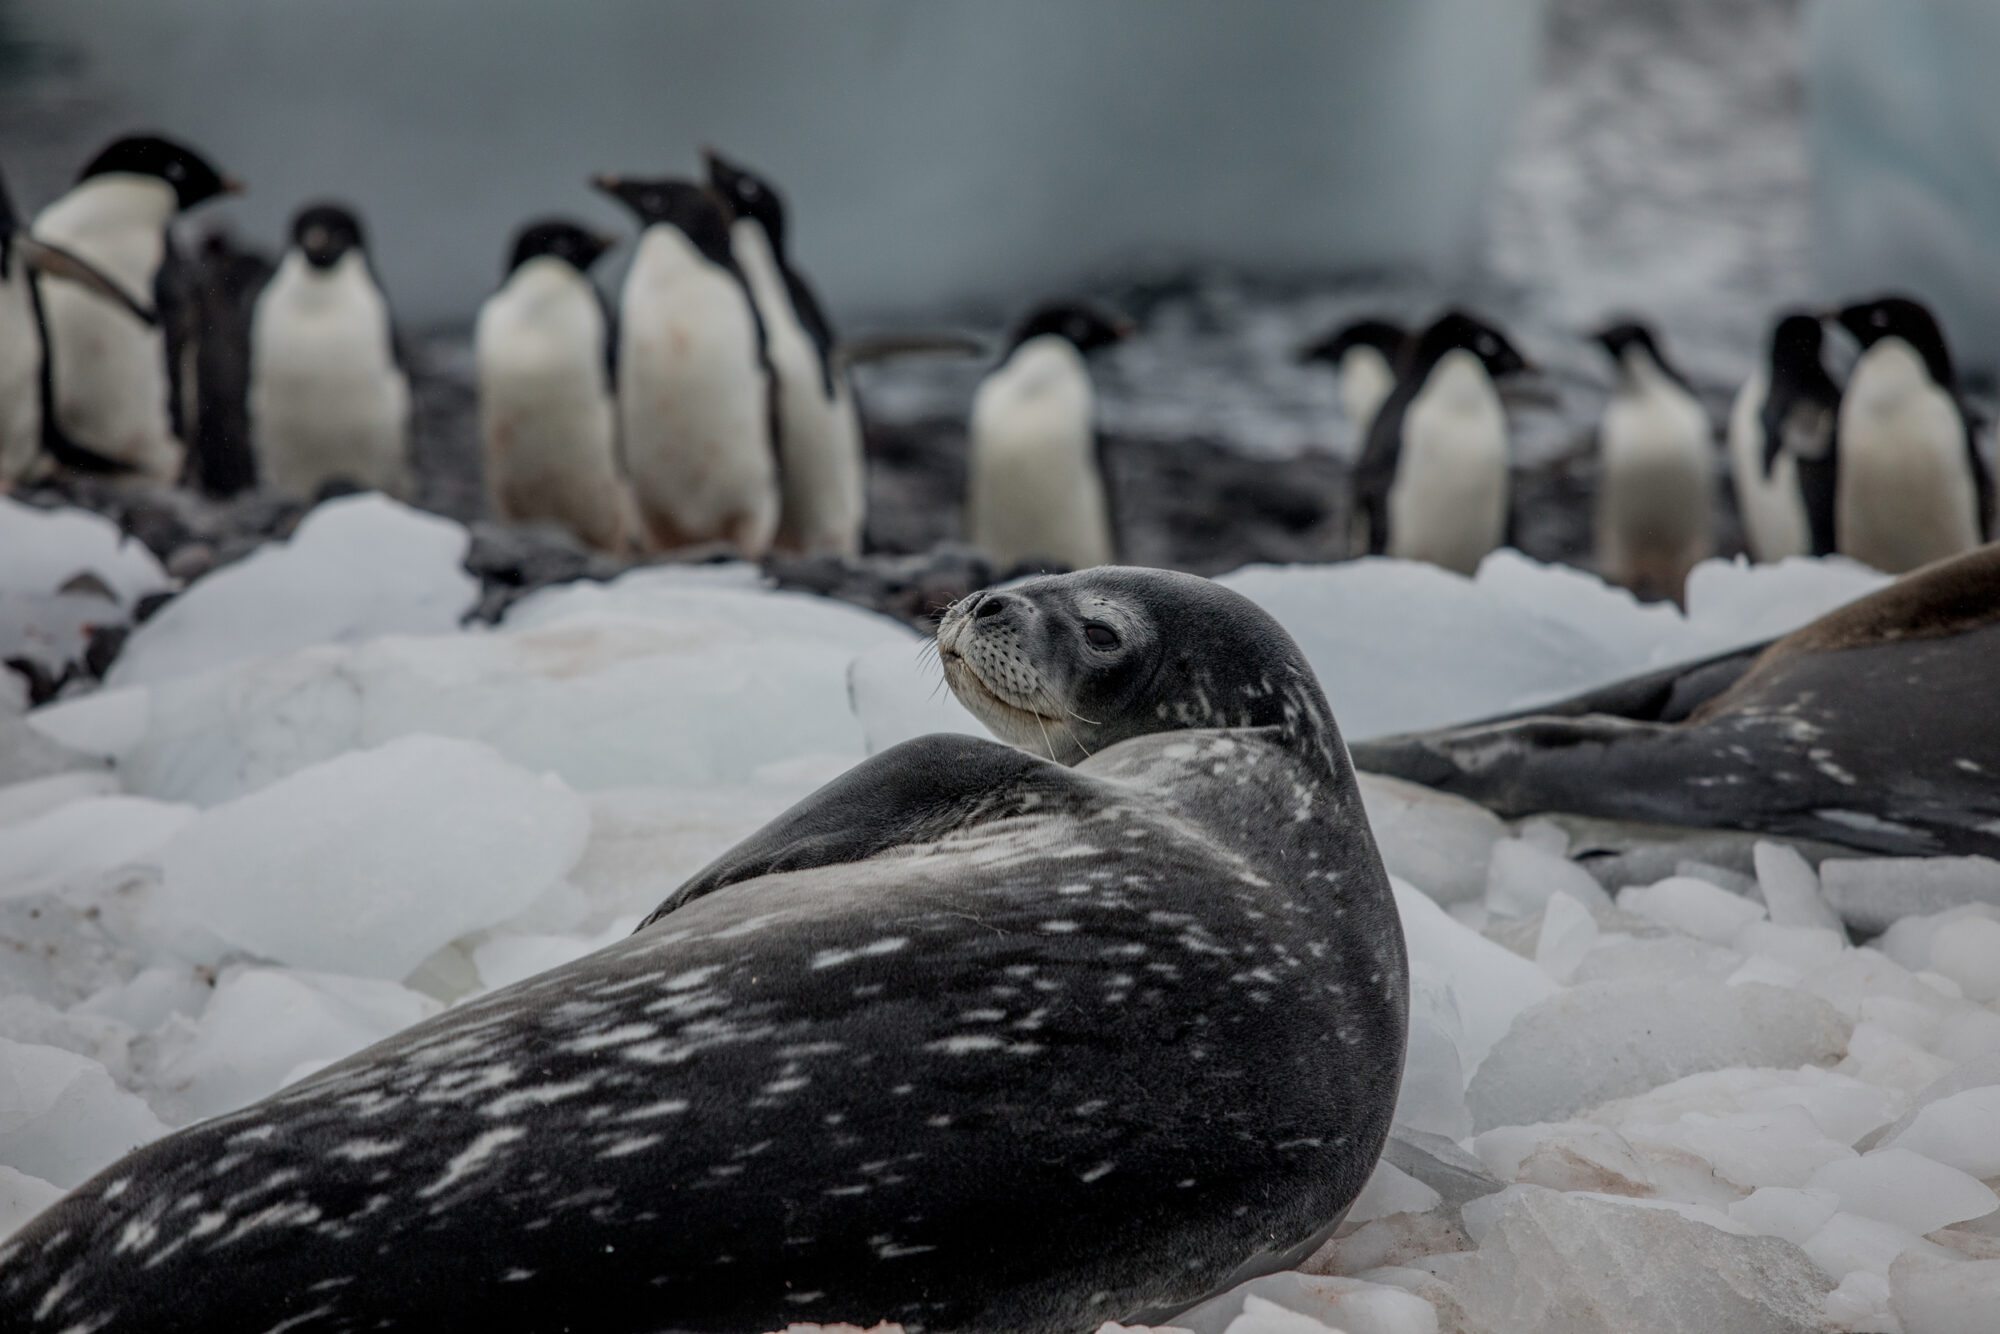 A seal cheekily turns to the camera while lounging on ice in front of a group of penguins.